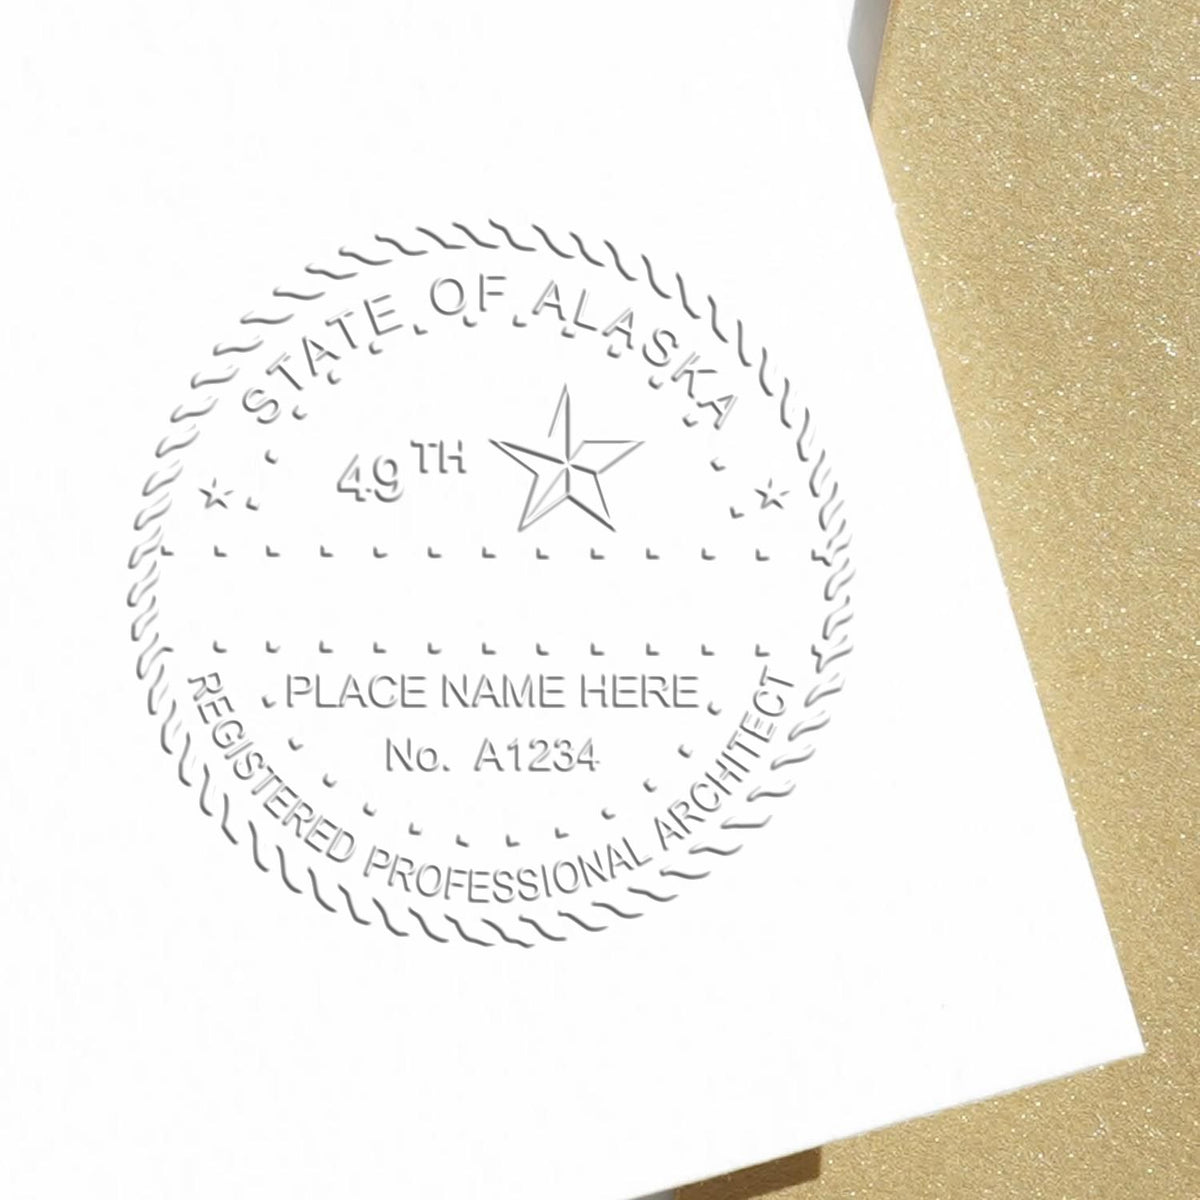 The State of Alaska Architectural Seal Embosser stamp impression comes to life with a crisp, detailed photo on paper - showcasing true professional quality.